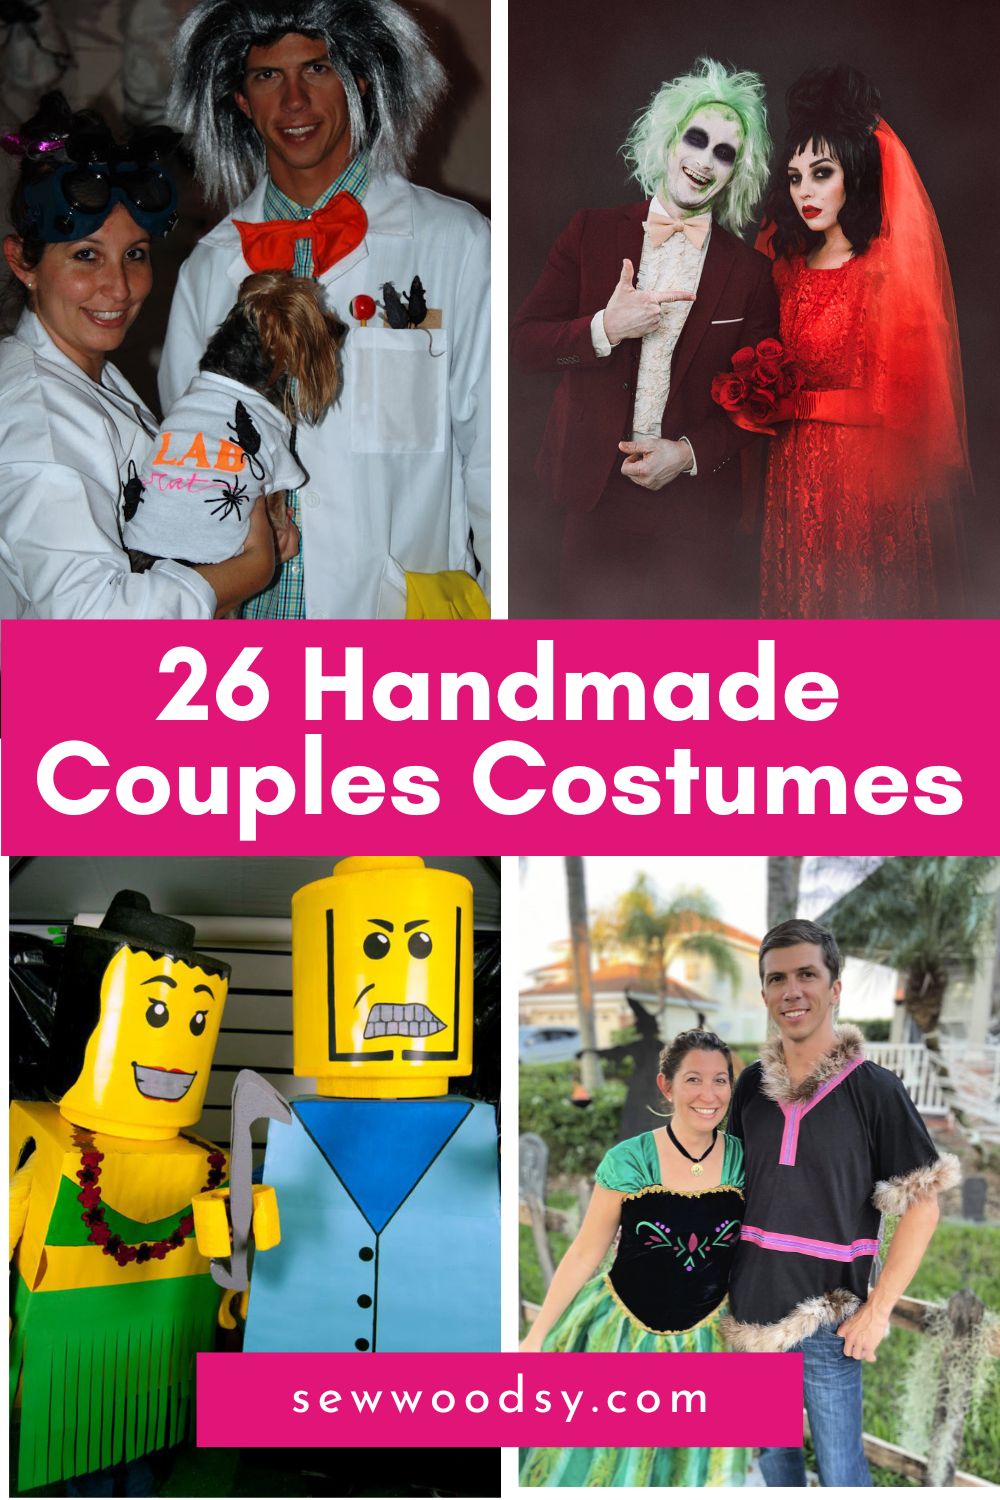 Four different couples in costumes with text on image for Pinterest.